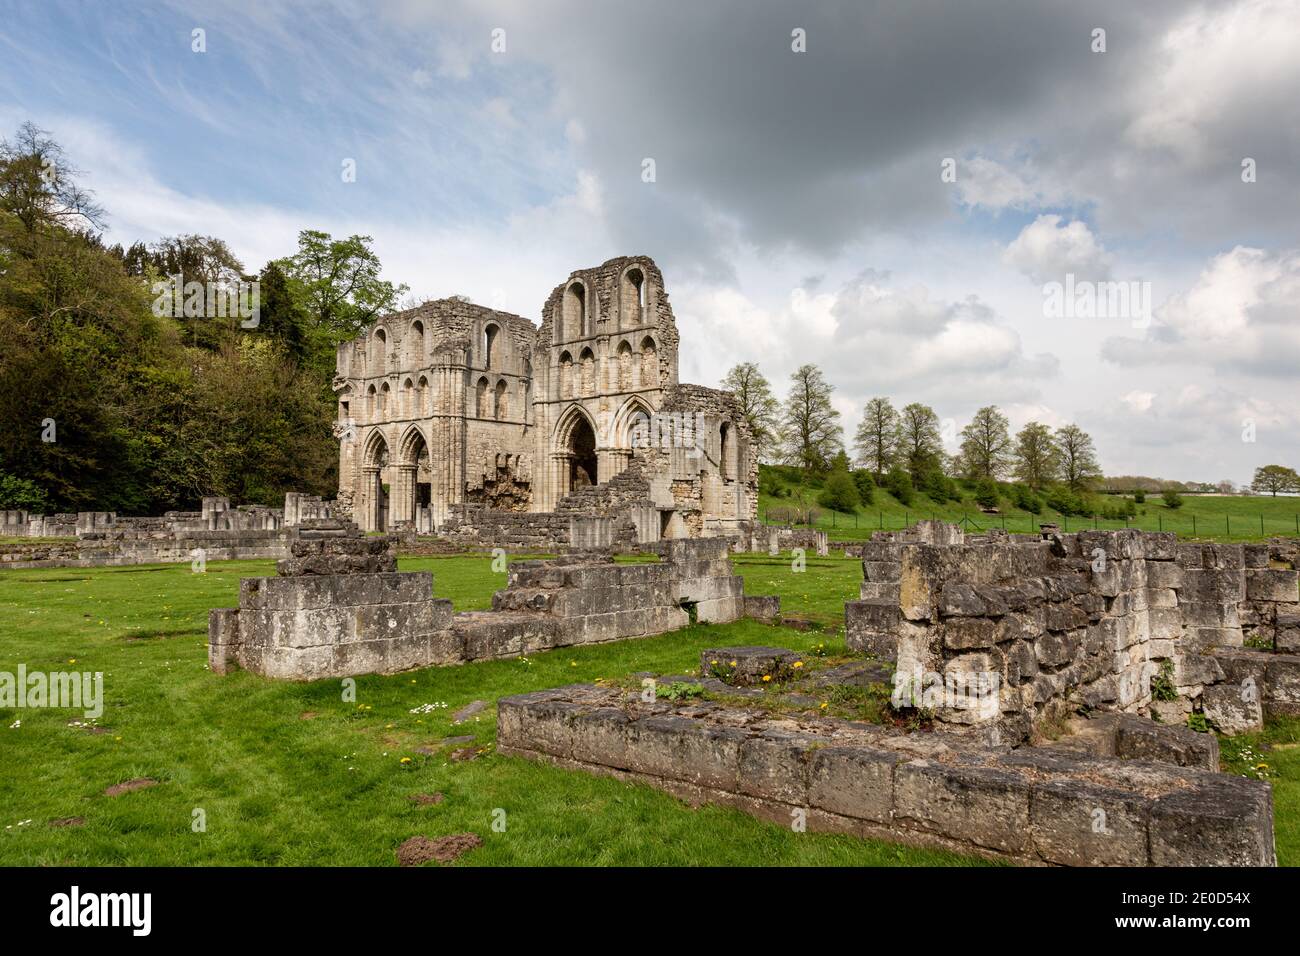 The ruins of Roche Abbey Cistercian monastery, Maltby near Rotherham, South Yorkshire, England, UK Stock Photo